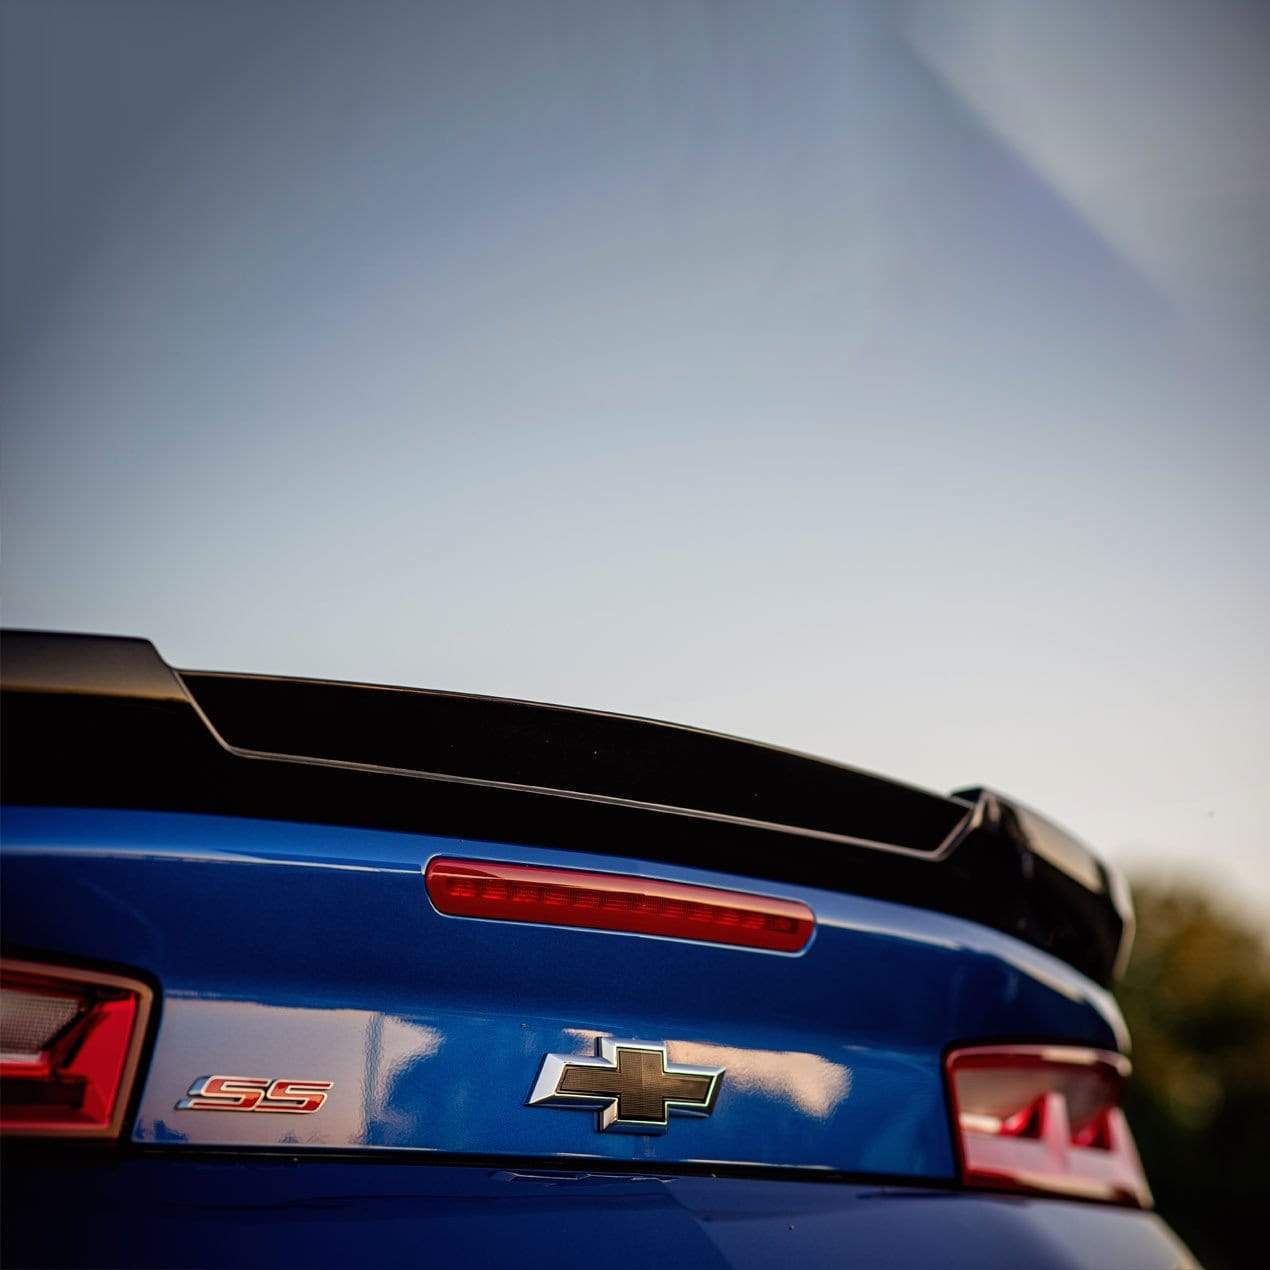 ACS Composite Rear Deck Spoiler for V6 & I4 Camaro (SKU 48-4-015) - Enhances down-force and complements the sleek design of the 6th gen Camaro.